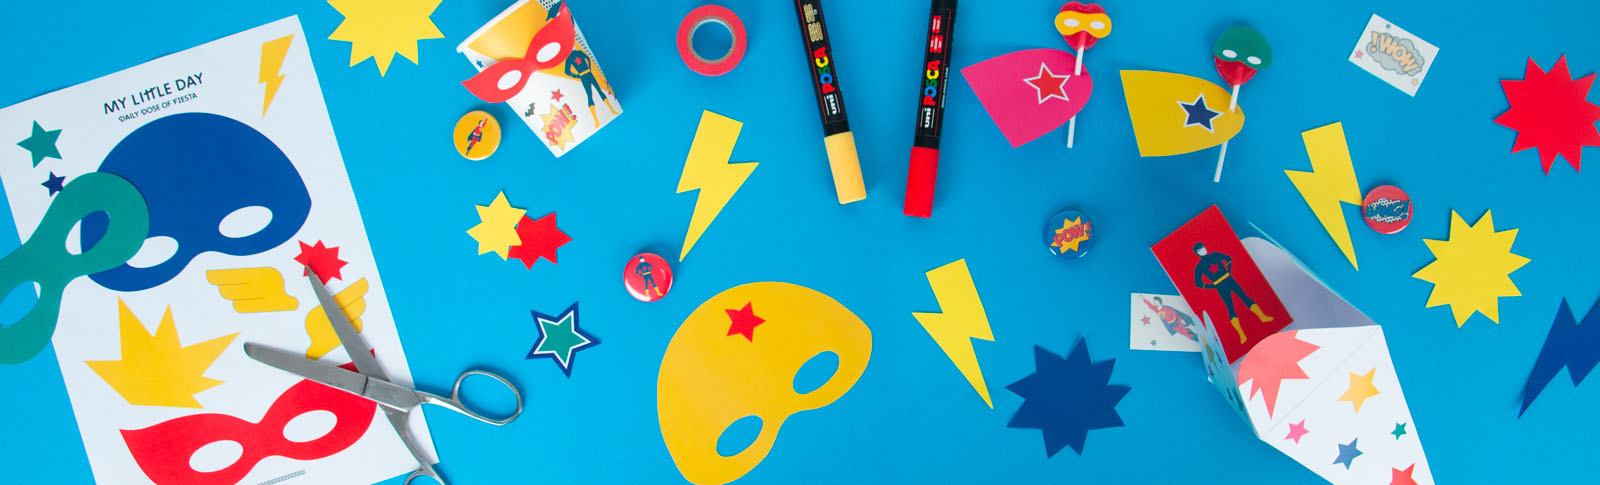 Ideas for children's birthday parties with a super hero theme